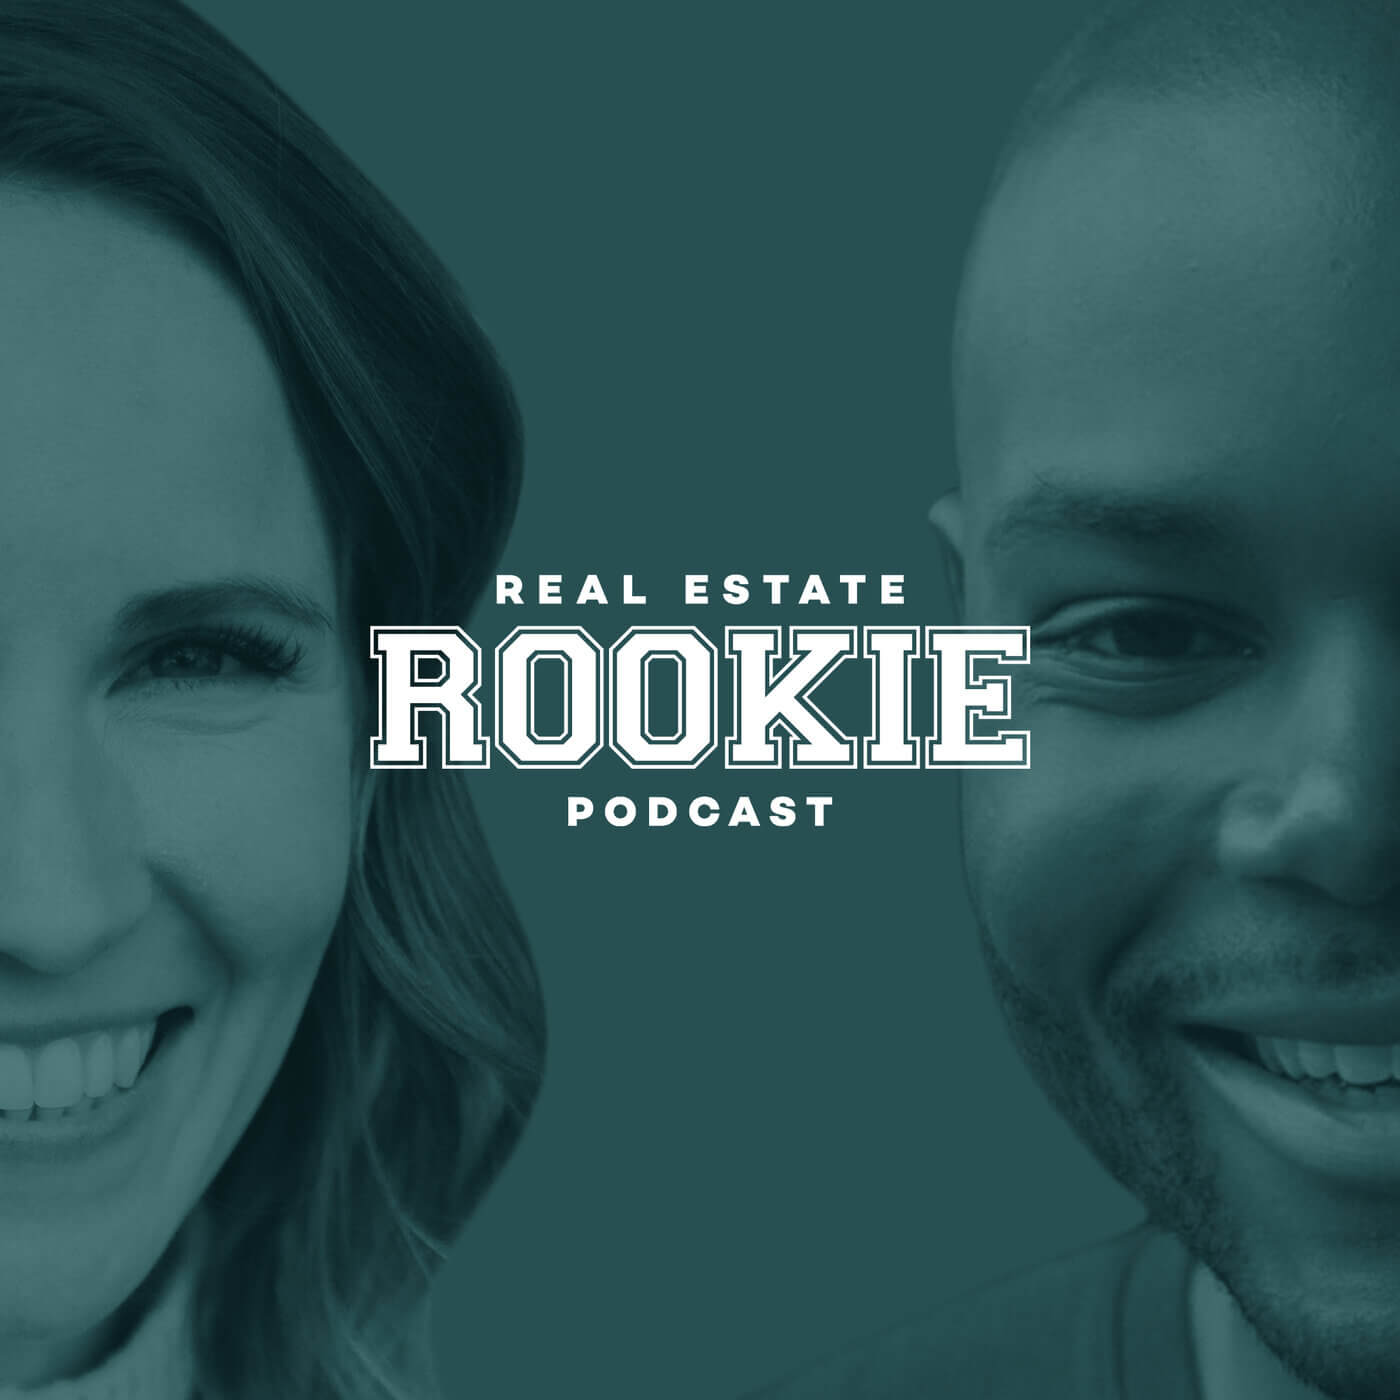 New to the industry? Check out the best podcast for new real estate agents - the Real Estate Rookie Podcast.